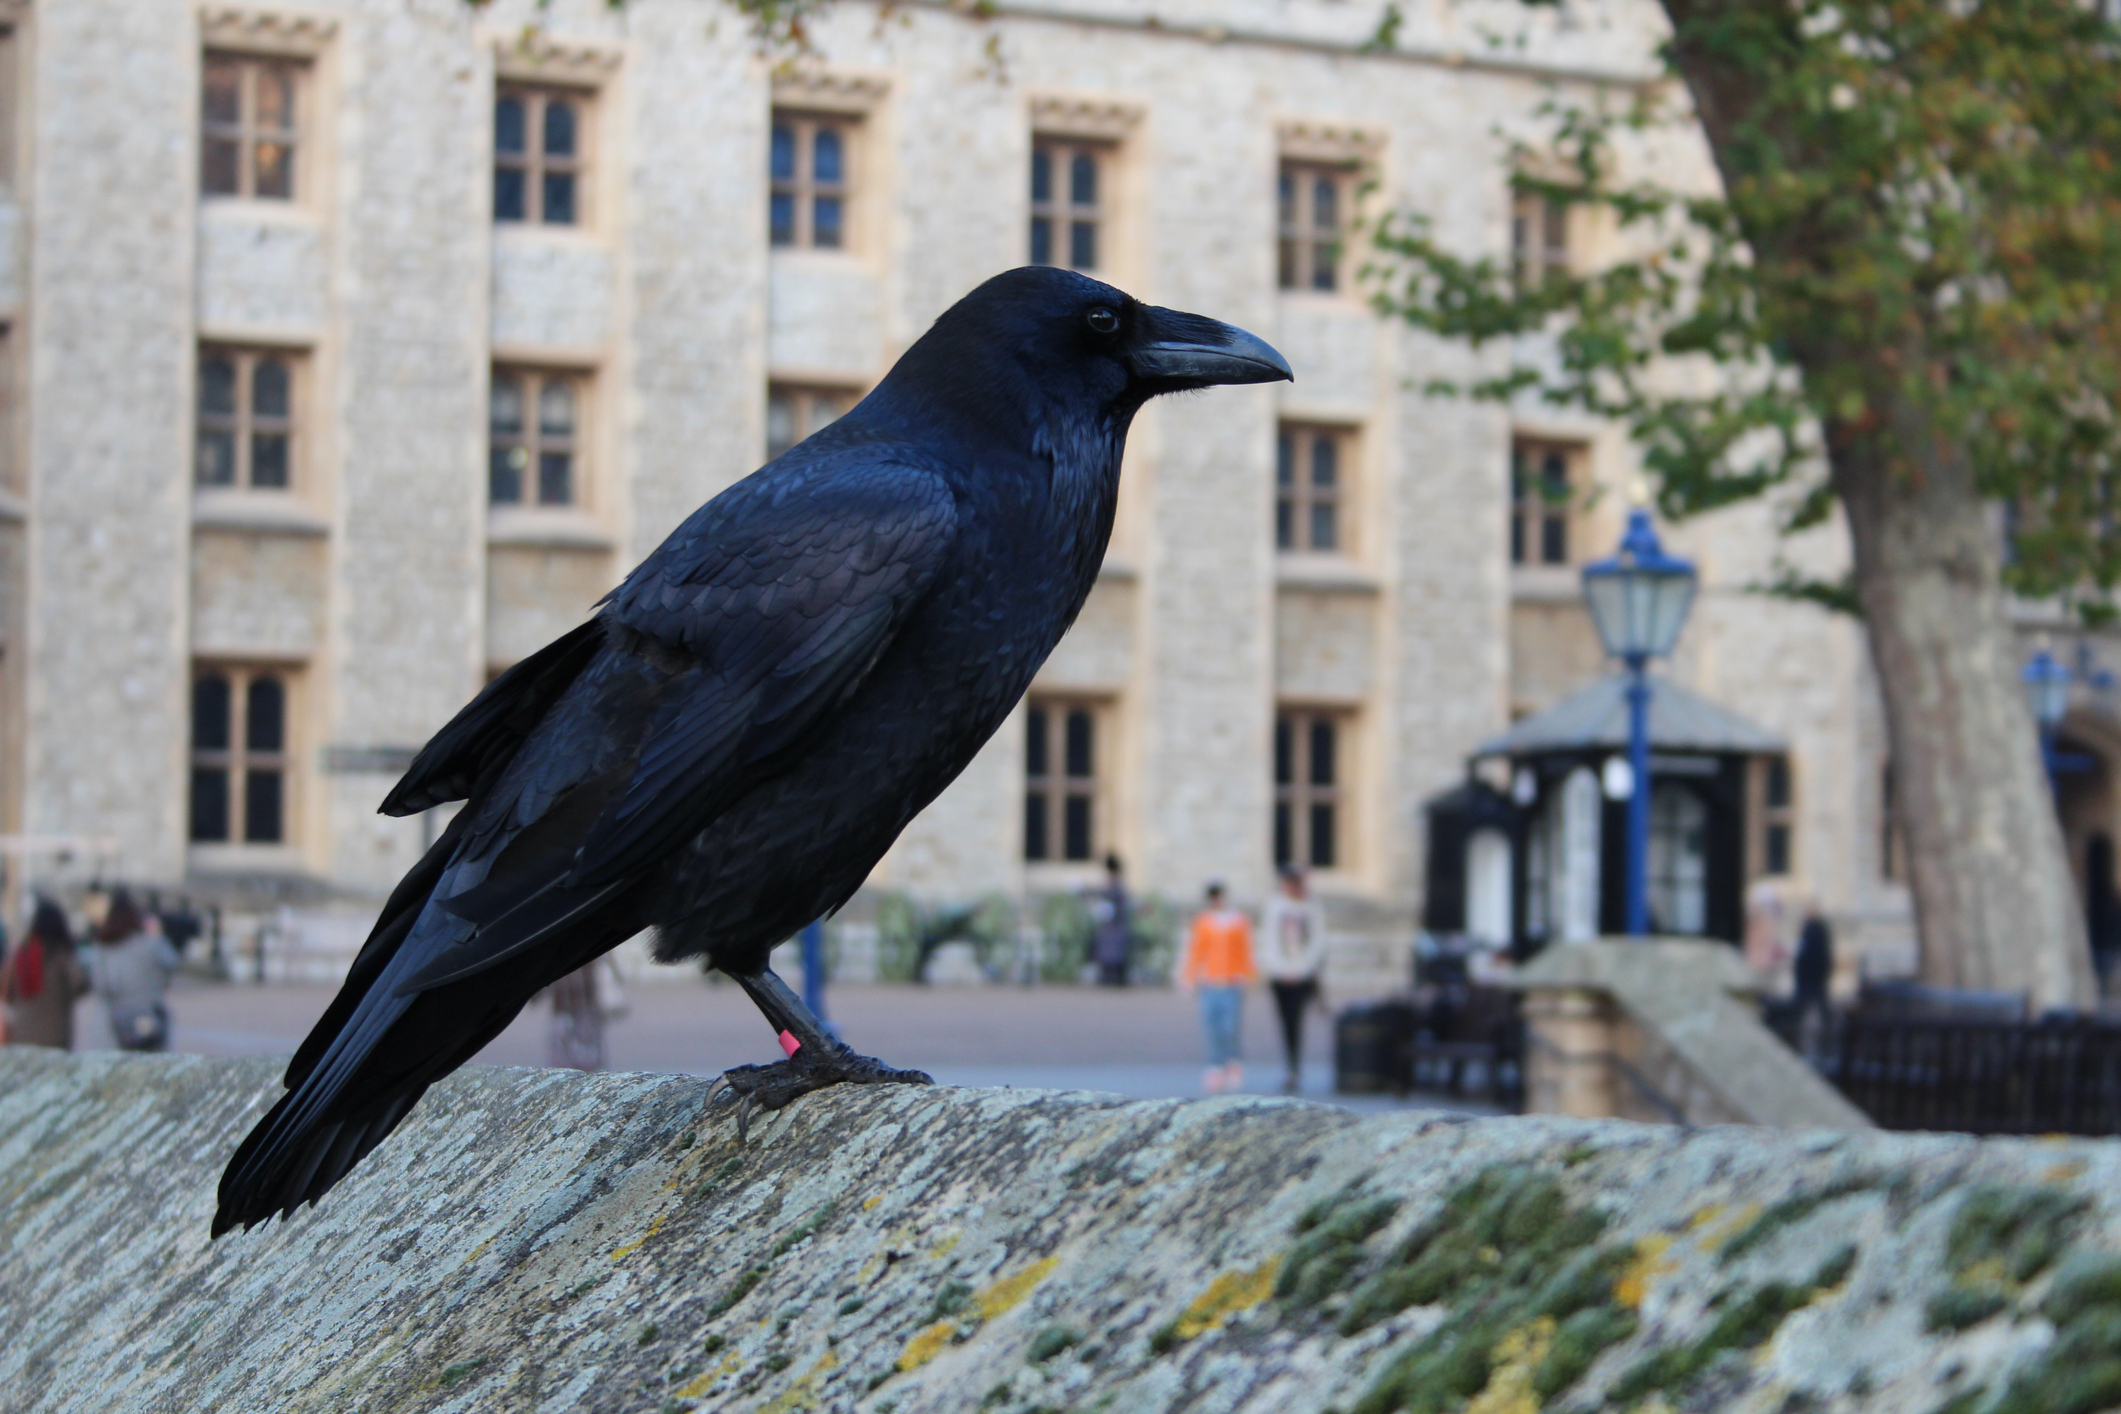 Tower of London's famous ravens are "bored" without tourists Travel